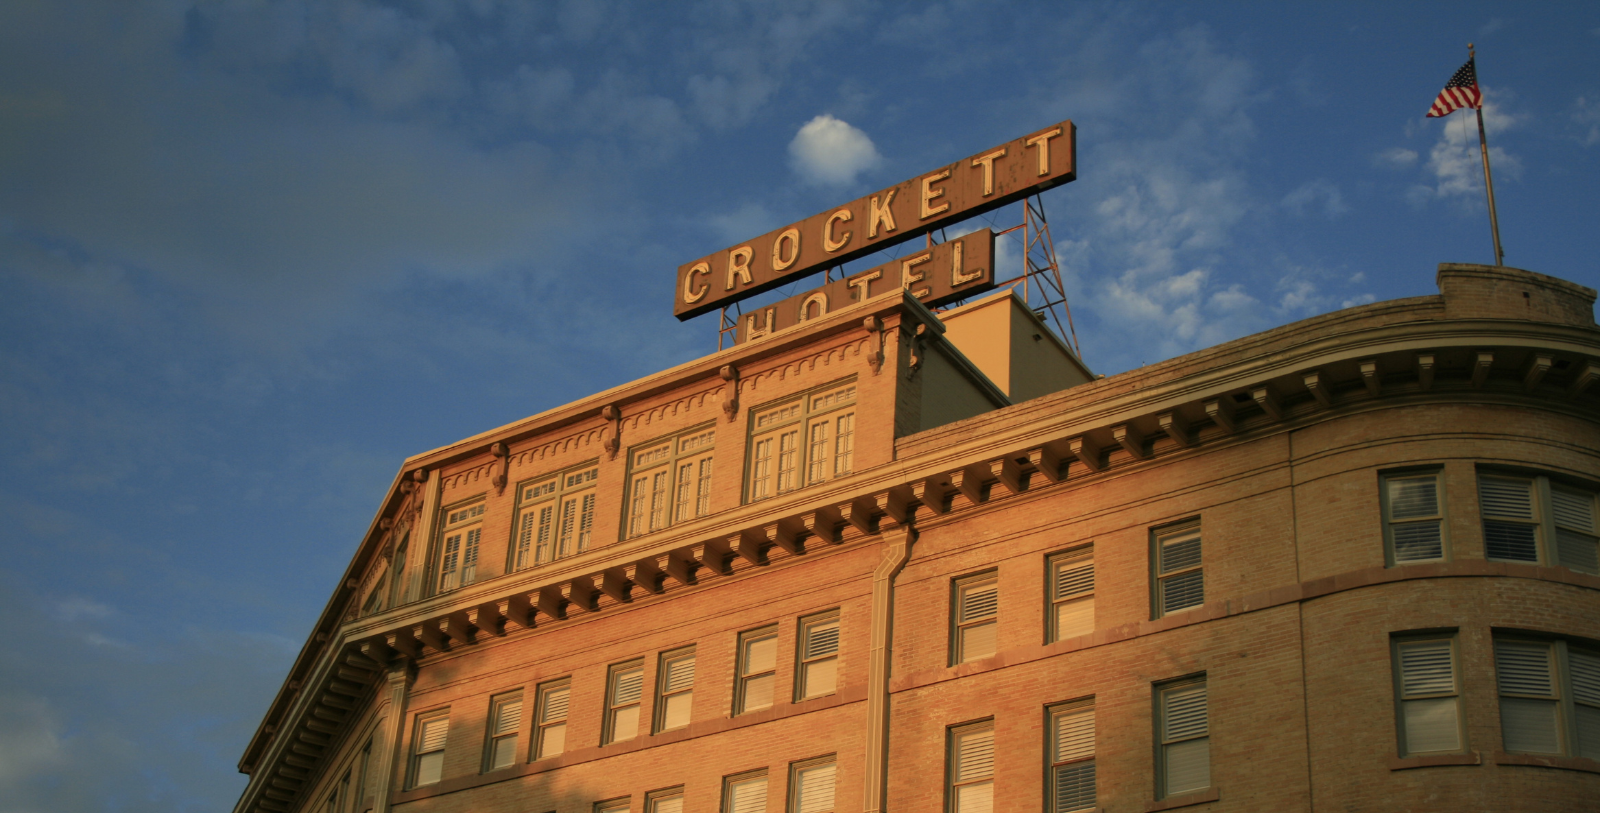 Image of Entrance The Crockett Hotel, 1909, Member of Historic Hotels of America, in San Antonio, Texas, Overview